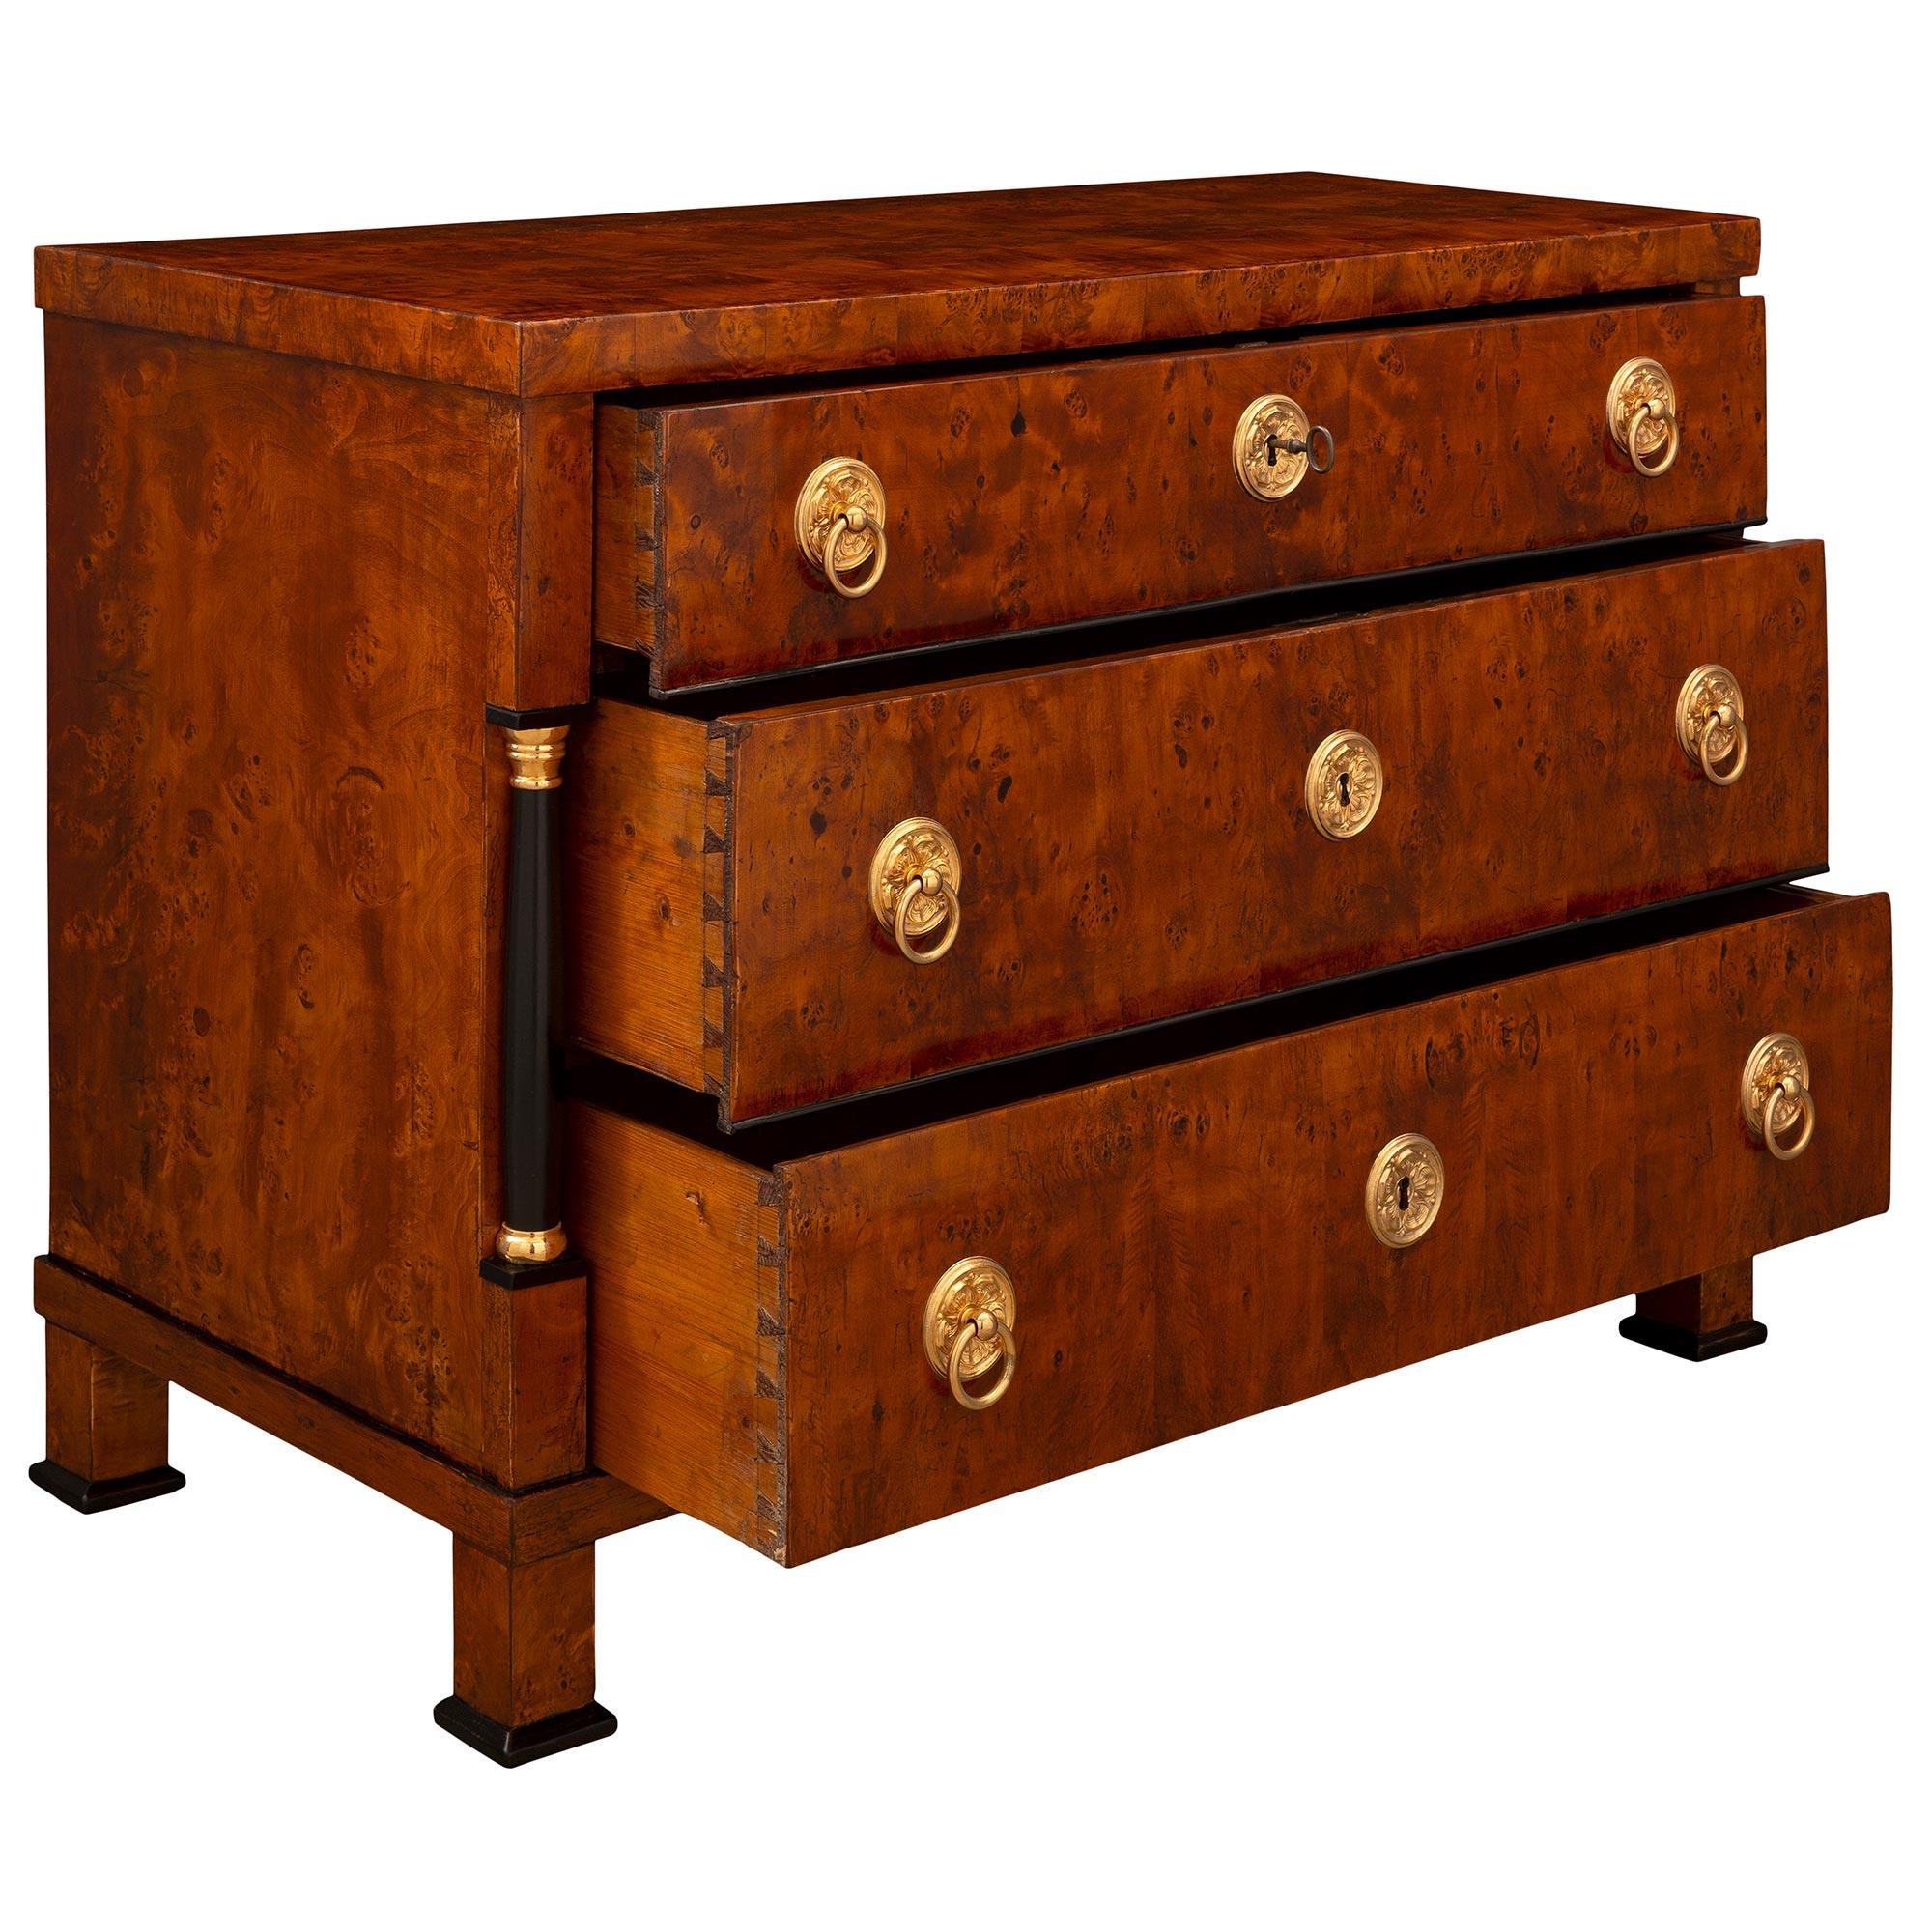 Continental 19th Century Burl Birchwood, Ebonized Fruitwood and Ormolu Commode In Good Condition For Sale In West Palm Beach, FL